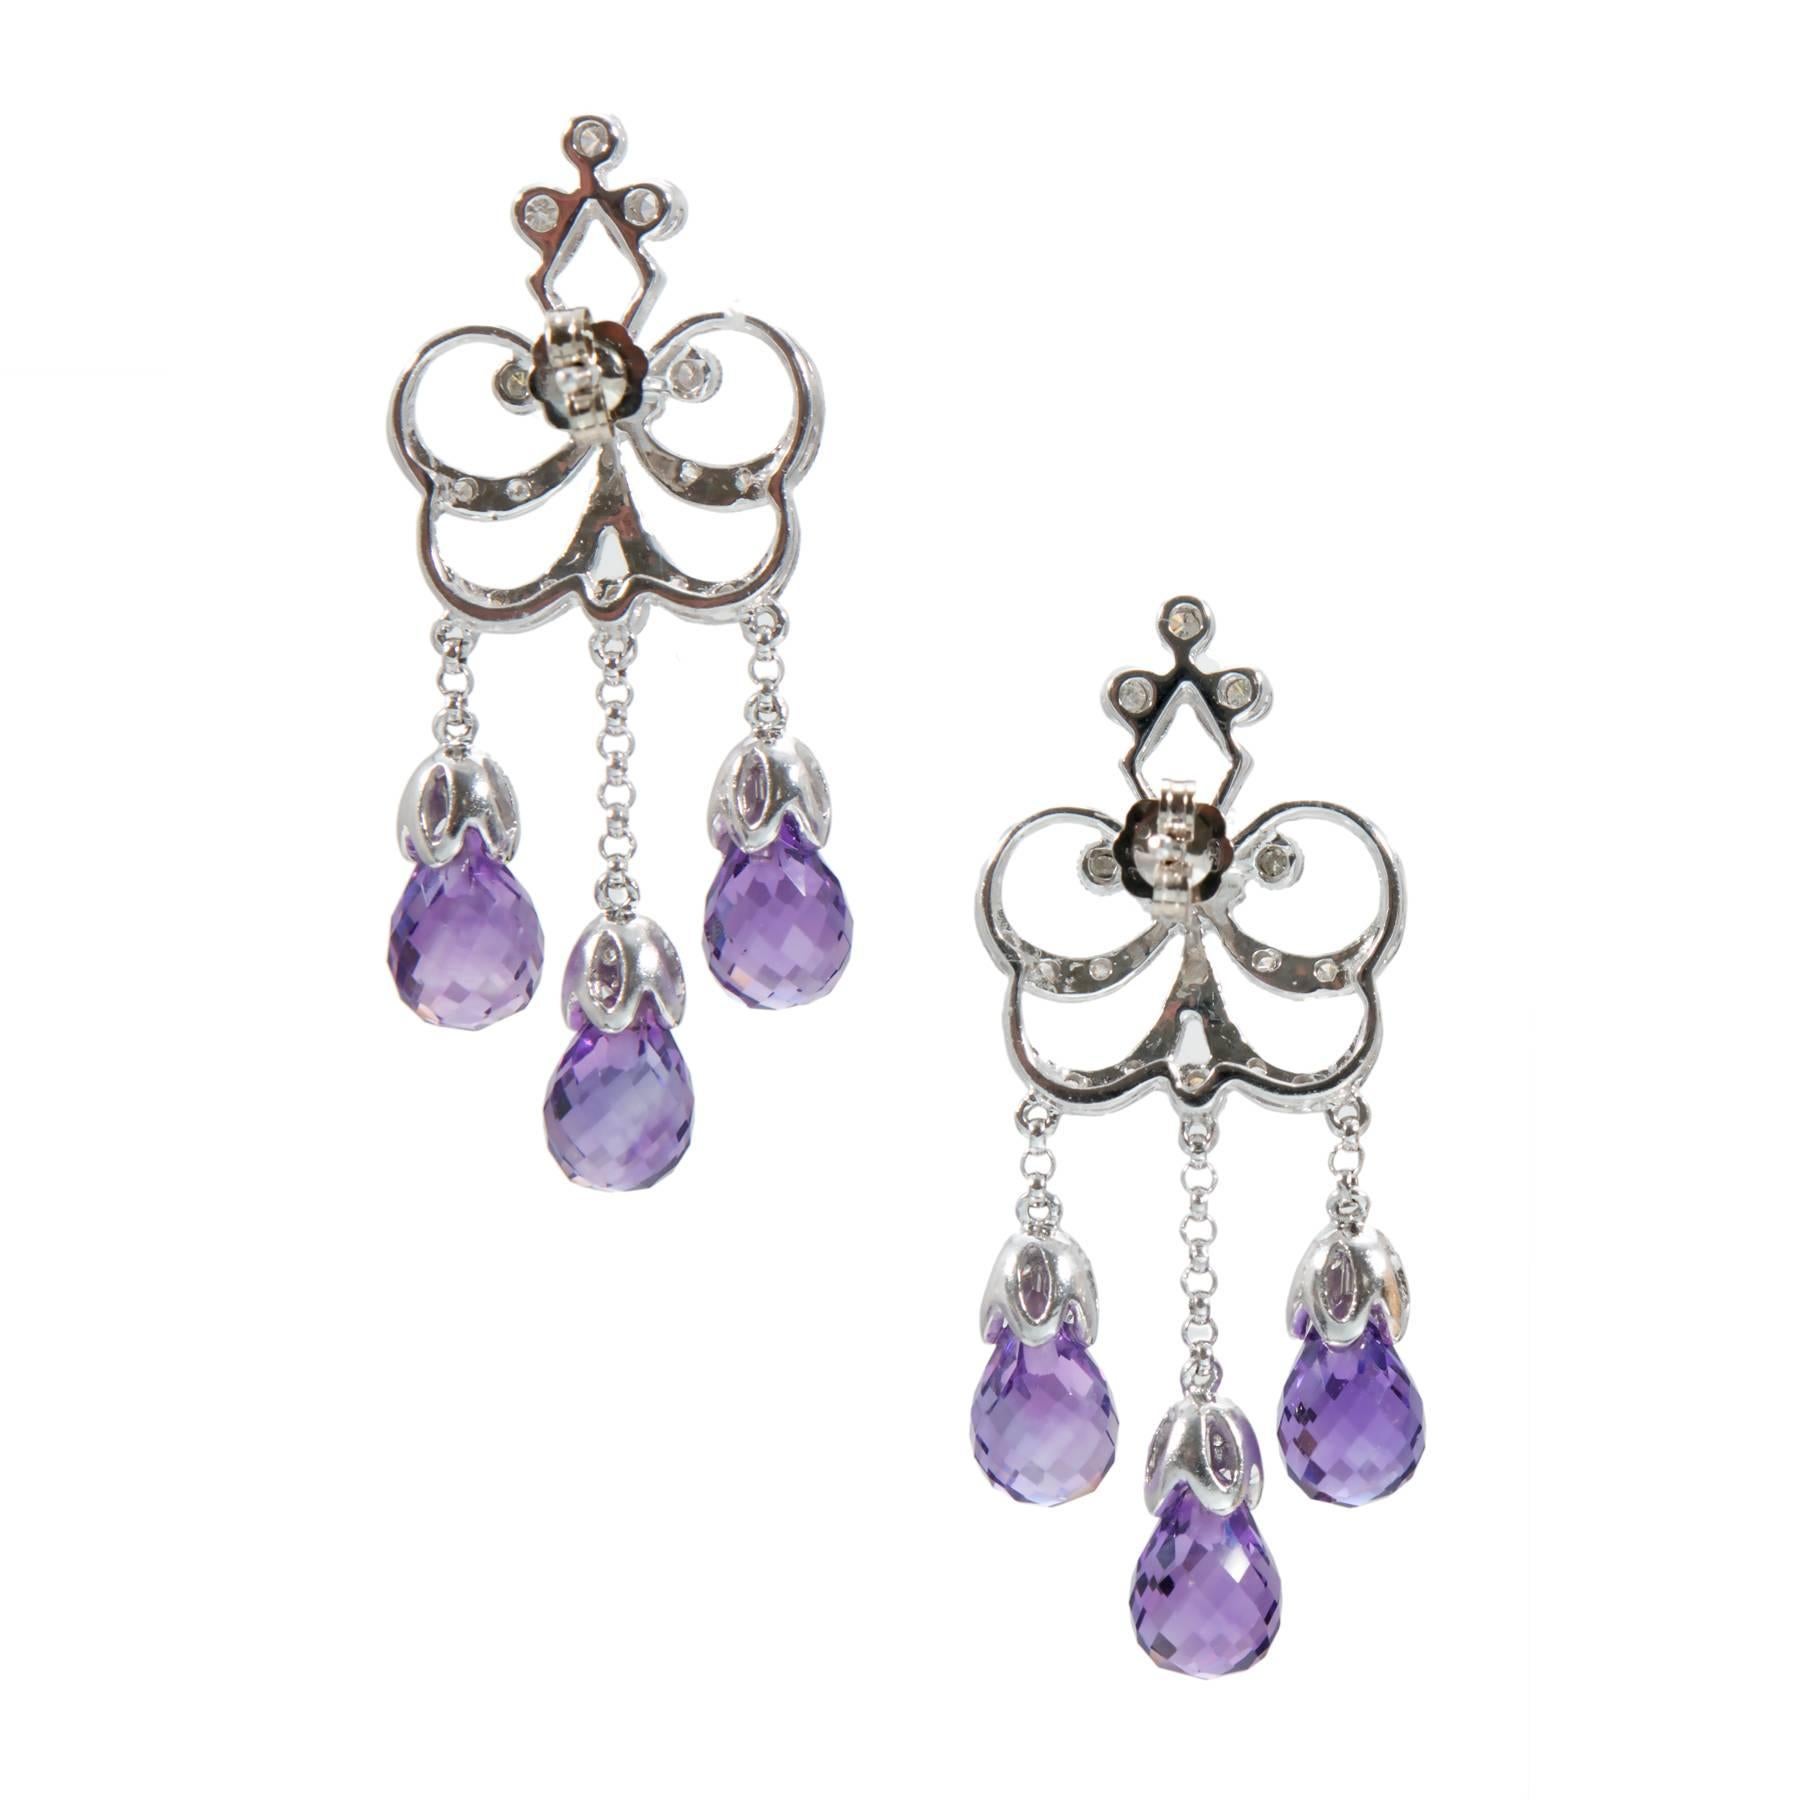 Victorian Style 14k white gold dangle earrings with diamonds and briolette Amethyst.

Six briolette cut genuine purple Amethyst 9 x 6mm, approx. total weight 12.00cts
52 round full and single cut diamonds, approx. total weight .50cts, H, SI1 to